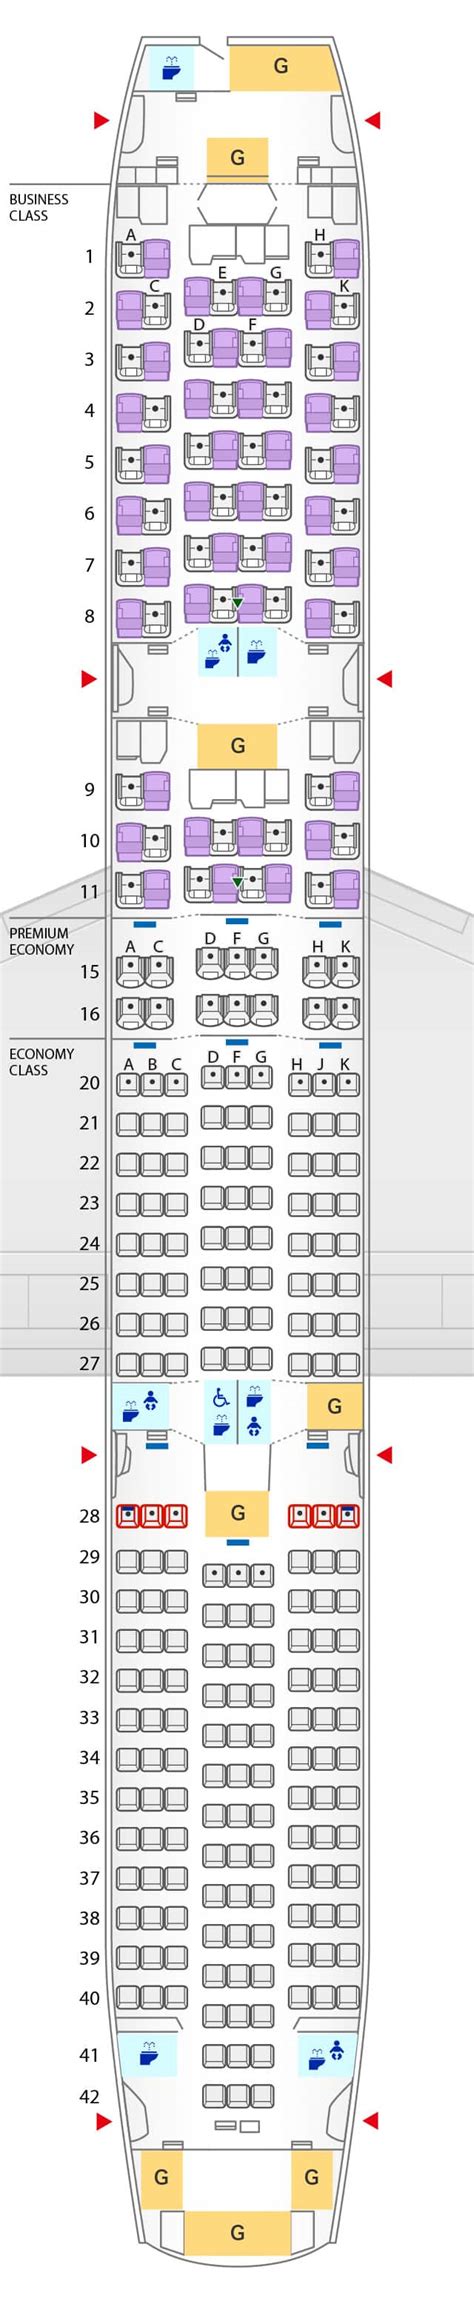 Boeing 787 9 dreamliner seat map. The Virgin Atlantic Boeing 787-9 aircraft features a three class configuration with 31 lie-flat bed Upper Class seats, 35 Premium Economy seats, and 198 standard Economy class … 